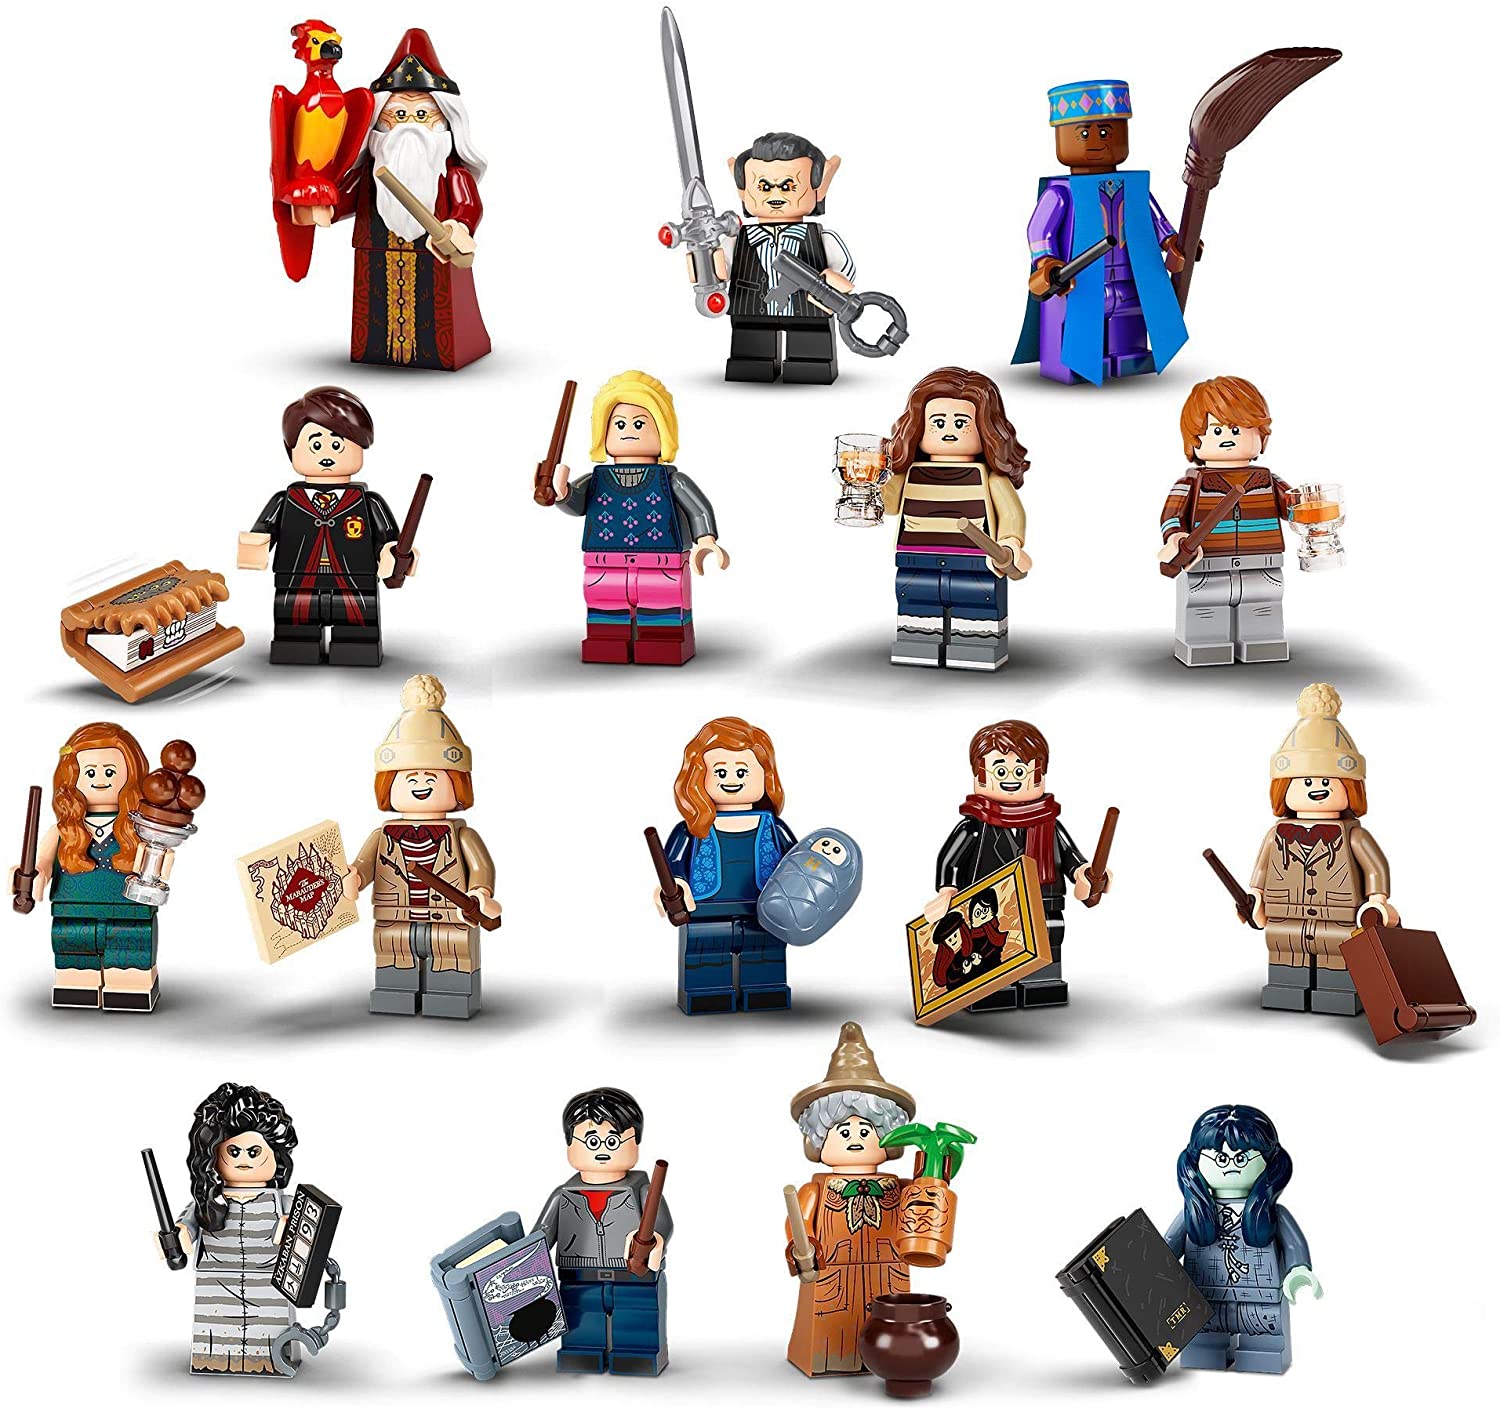 LEGO Harry Potter Minifigures Series 2 is coming! - YouLoveIt.com